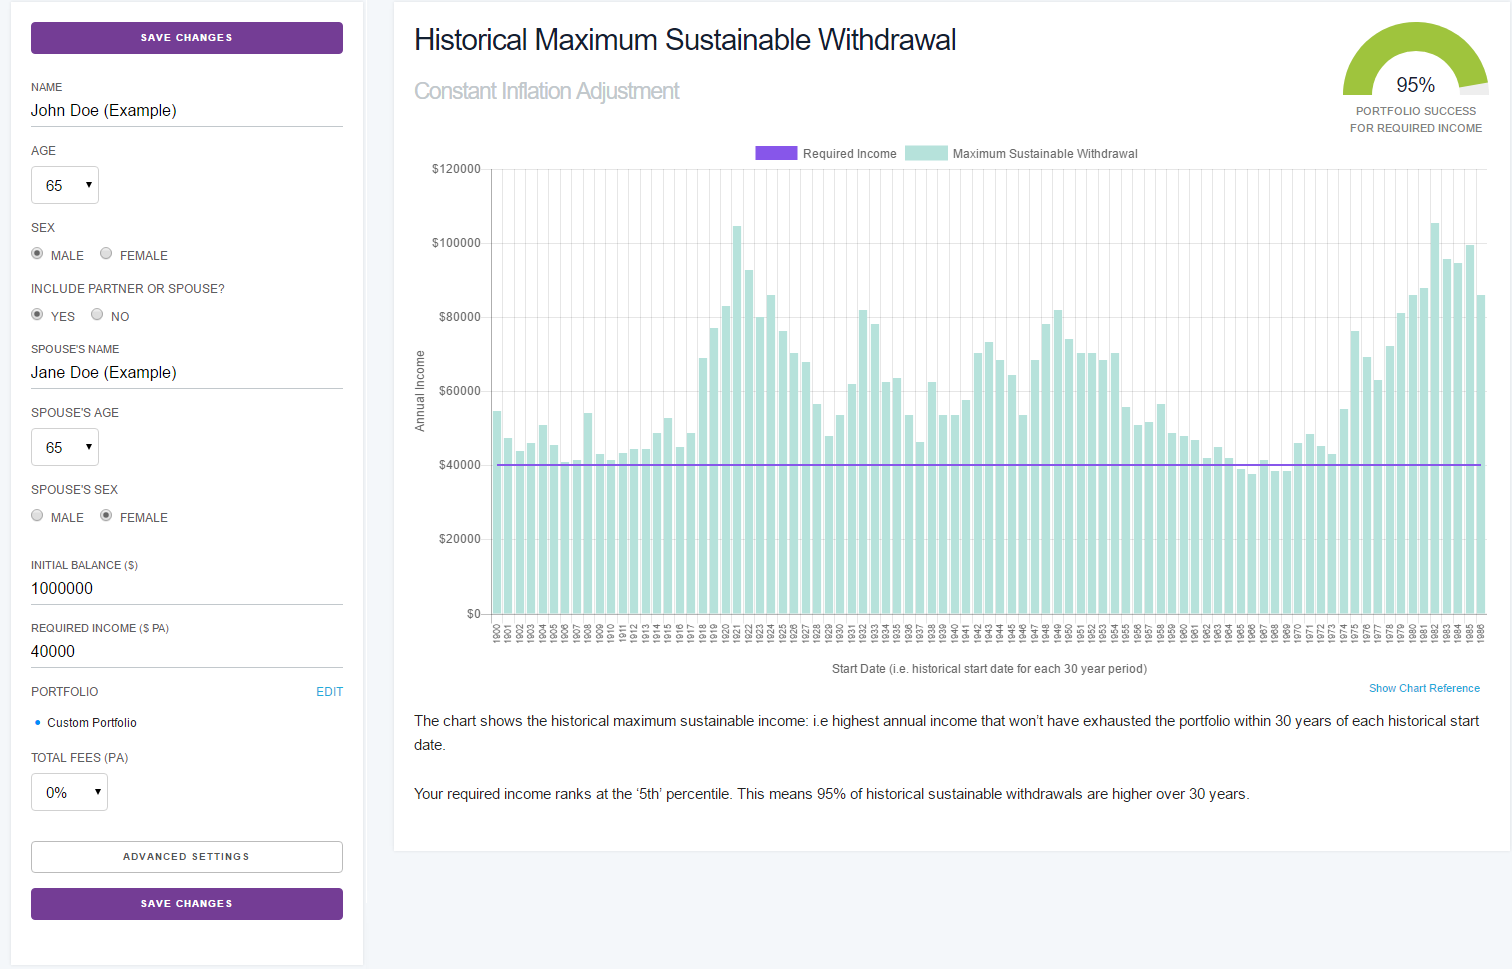 Historical Maximum Sustainable Withdrawal